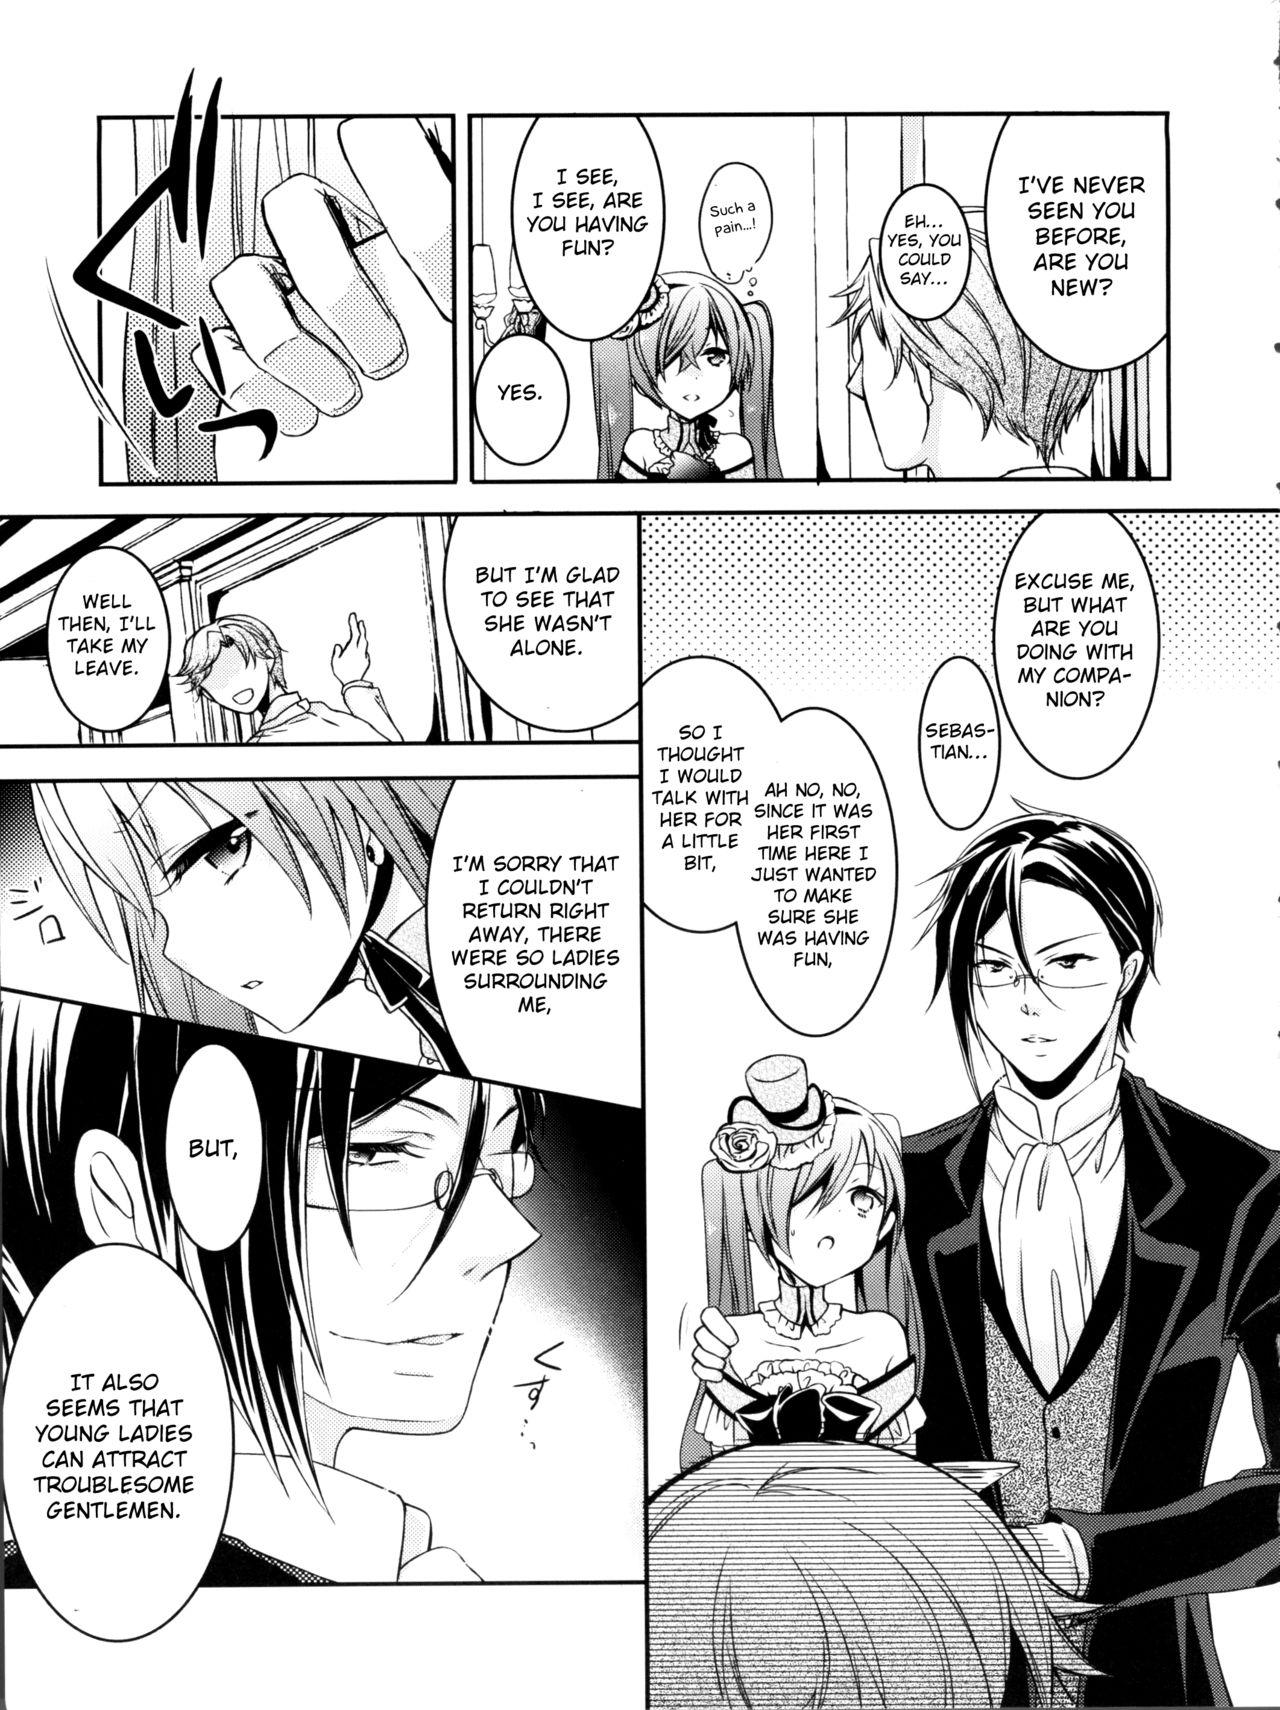 Buttplug Apatite - Black butler Hot Blow Jobs - Page 4